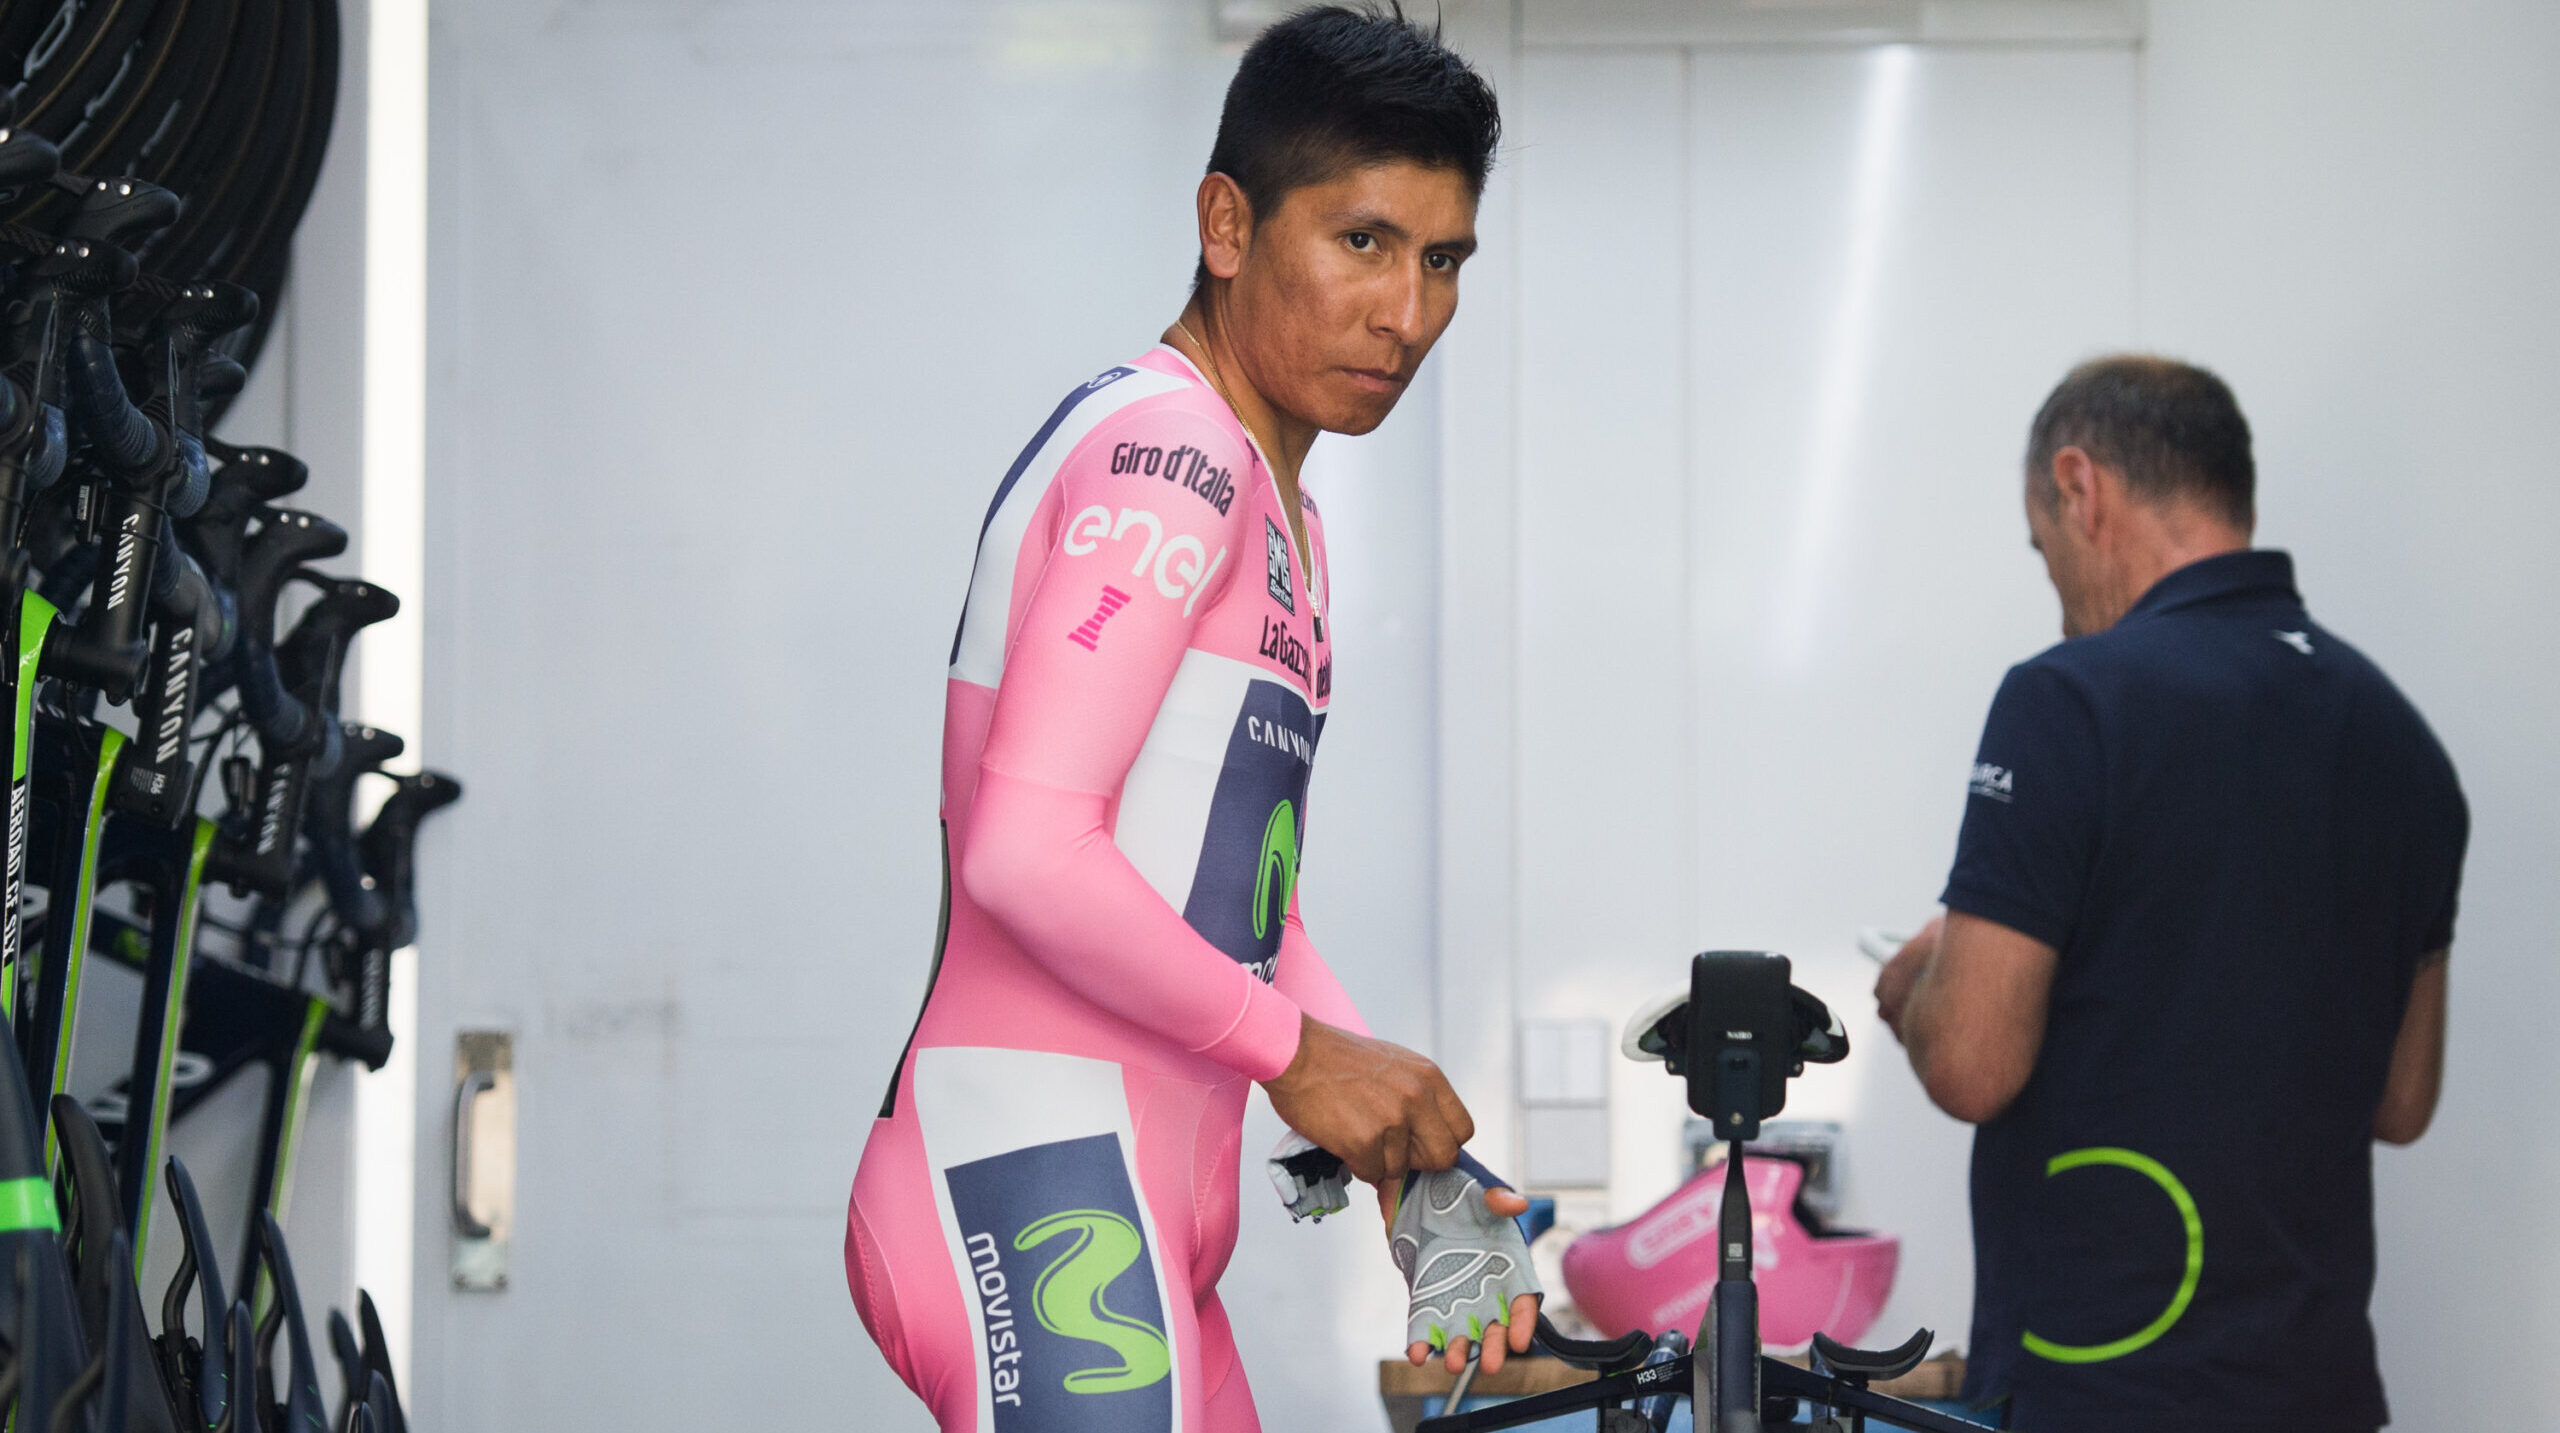 Quintana returns, and back up to World Tour, after tramadol case